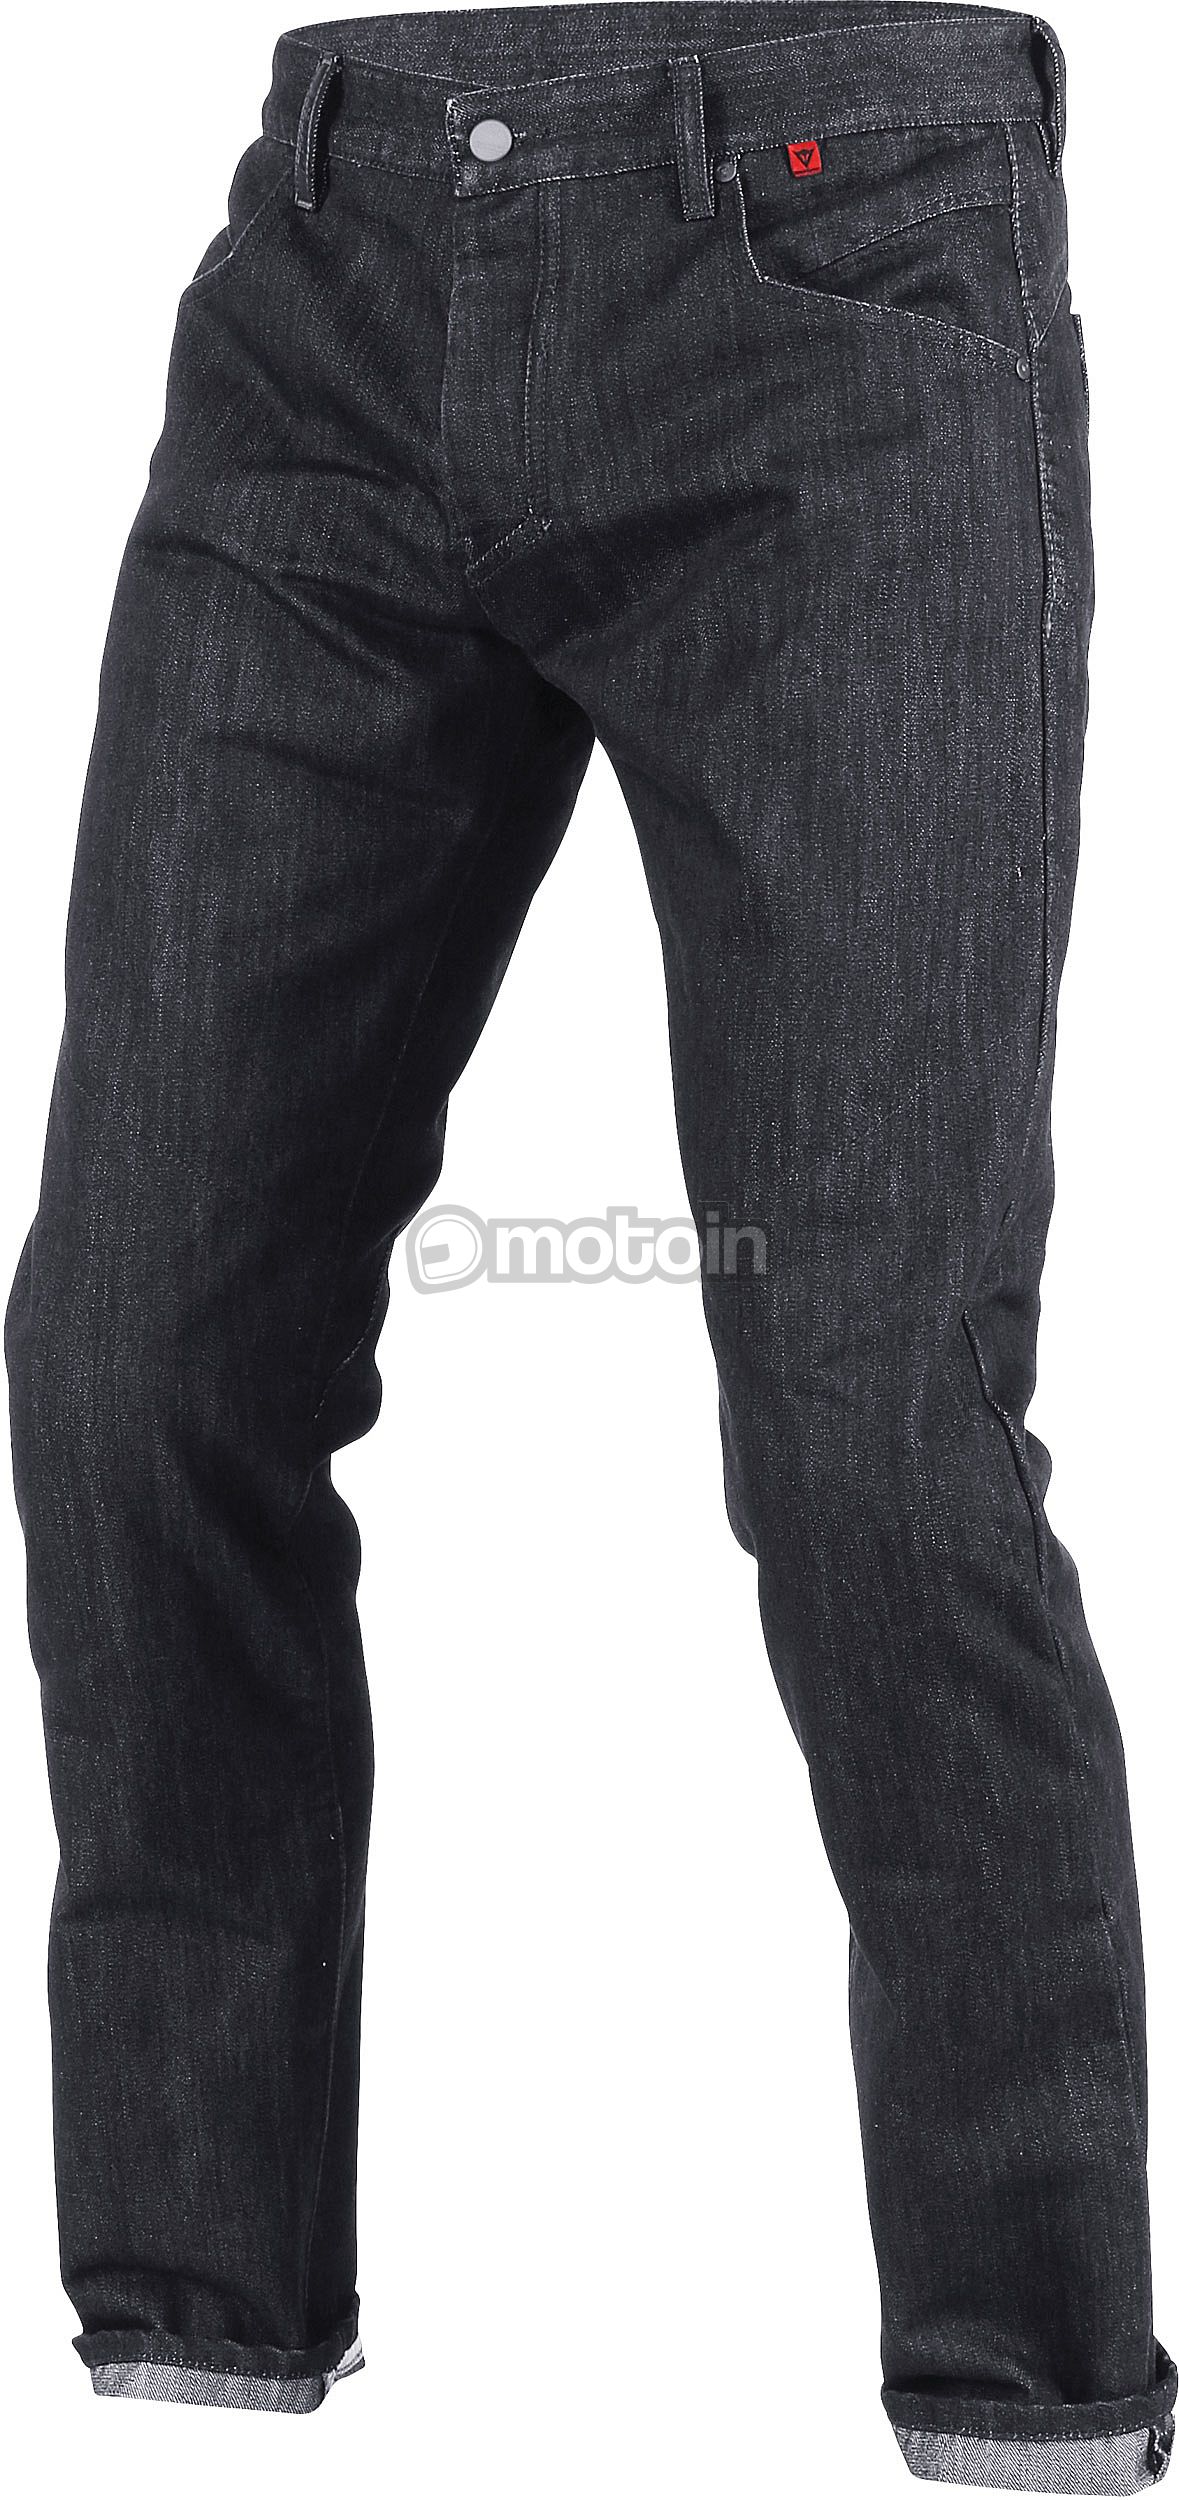 Dainese Strokeville, Jeans